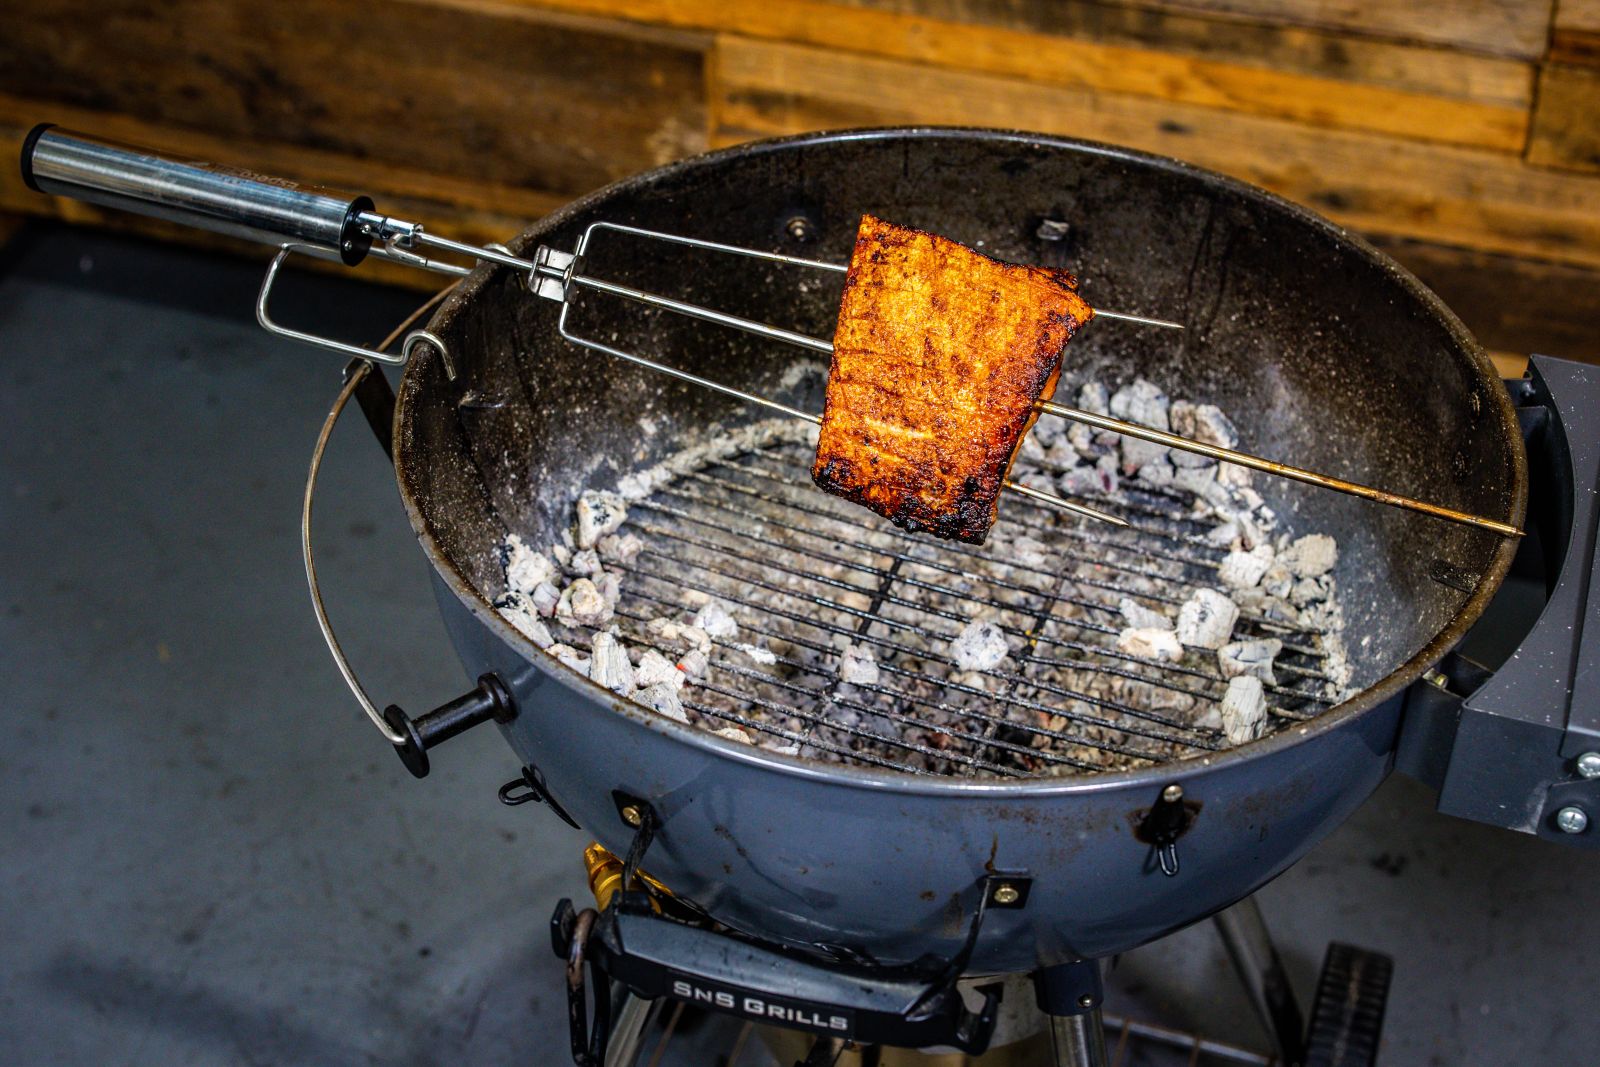 This_image_shows_pork_belly_being_cooked_Espetosul_rotisserie_using_kettle_bbq